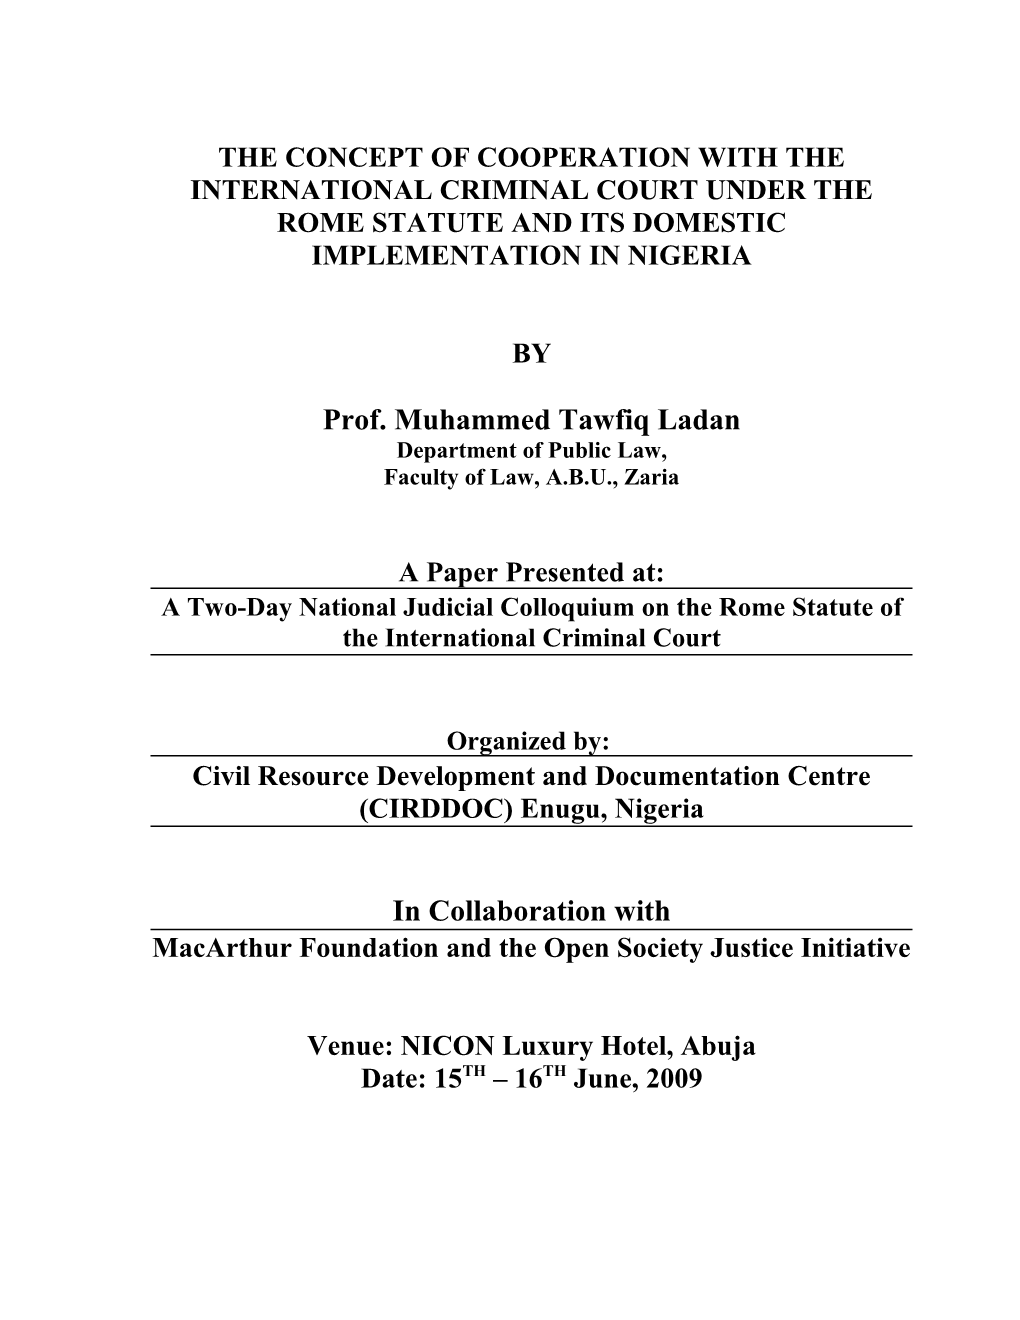 An Overview of the Rome Statute of the International Criminal Court